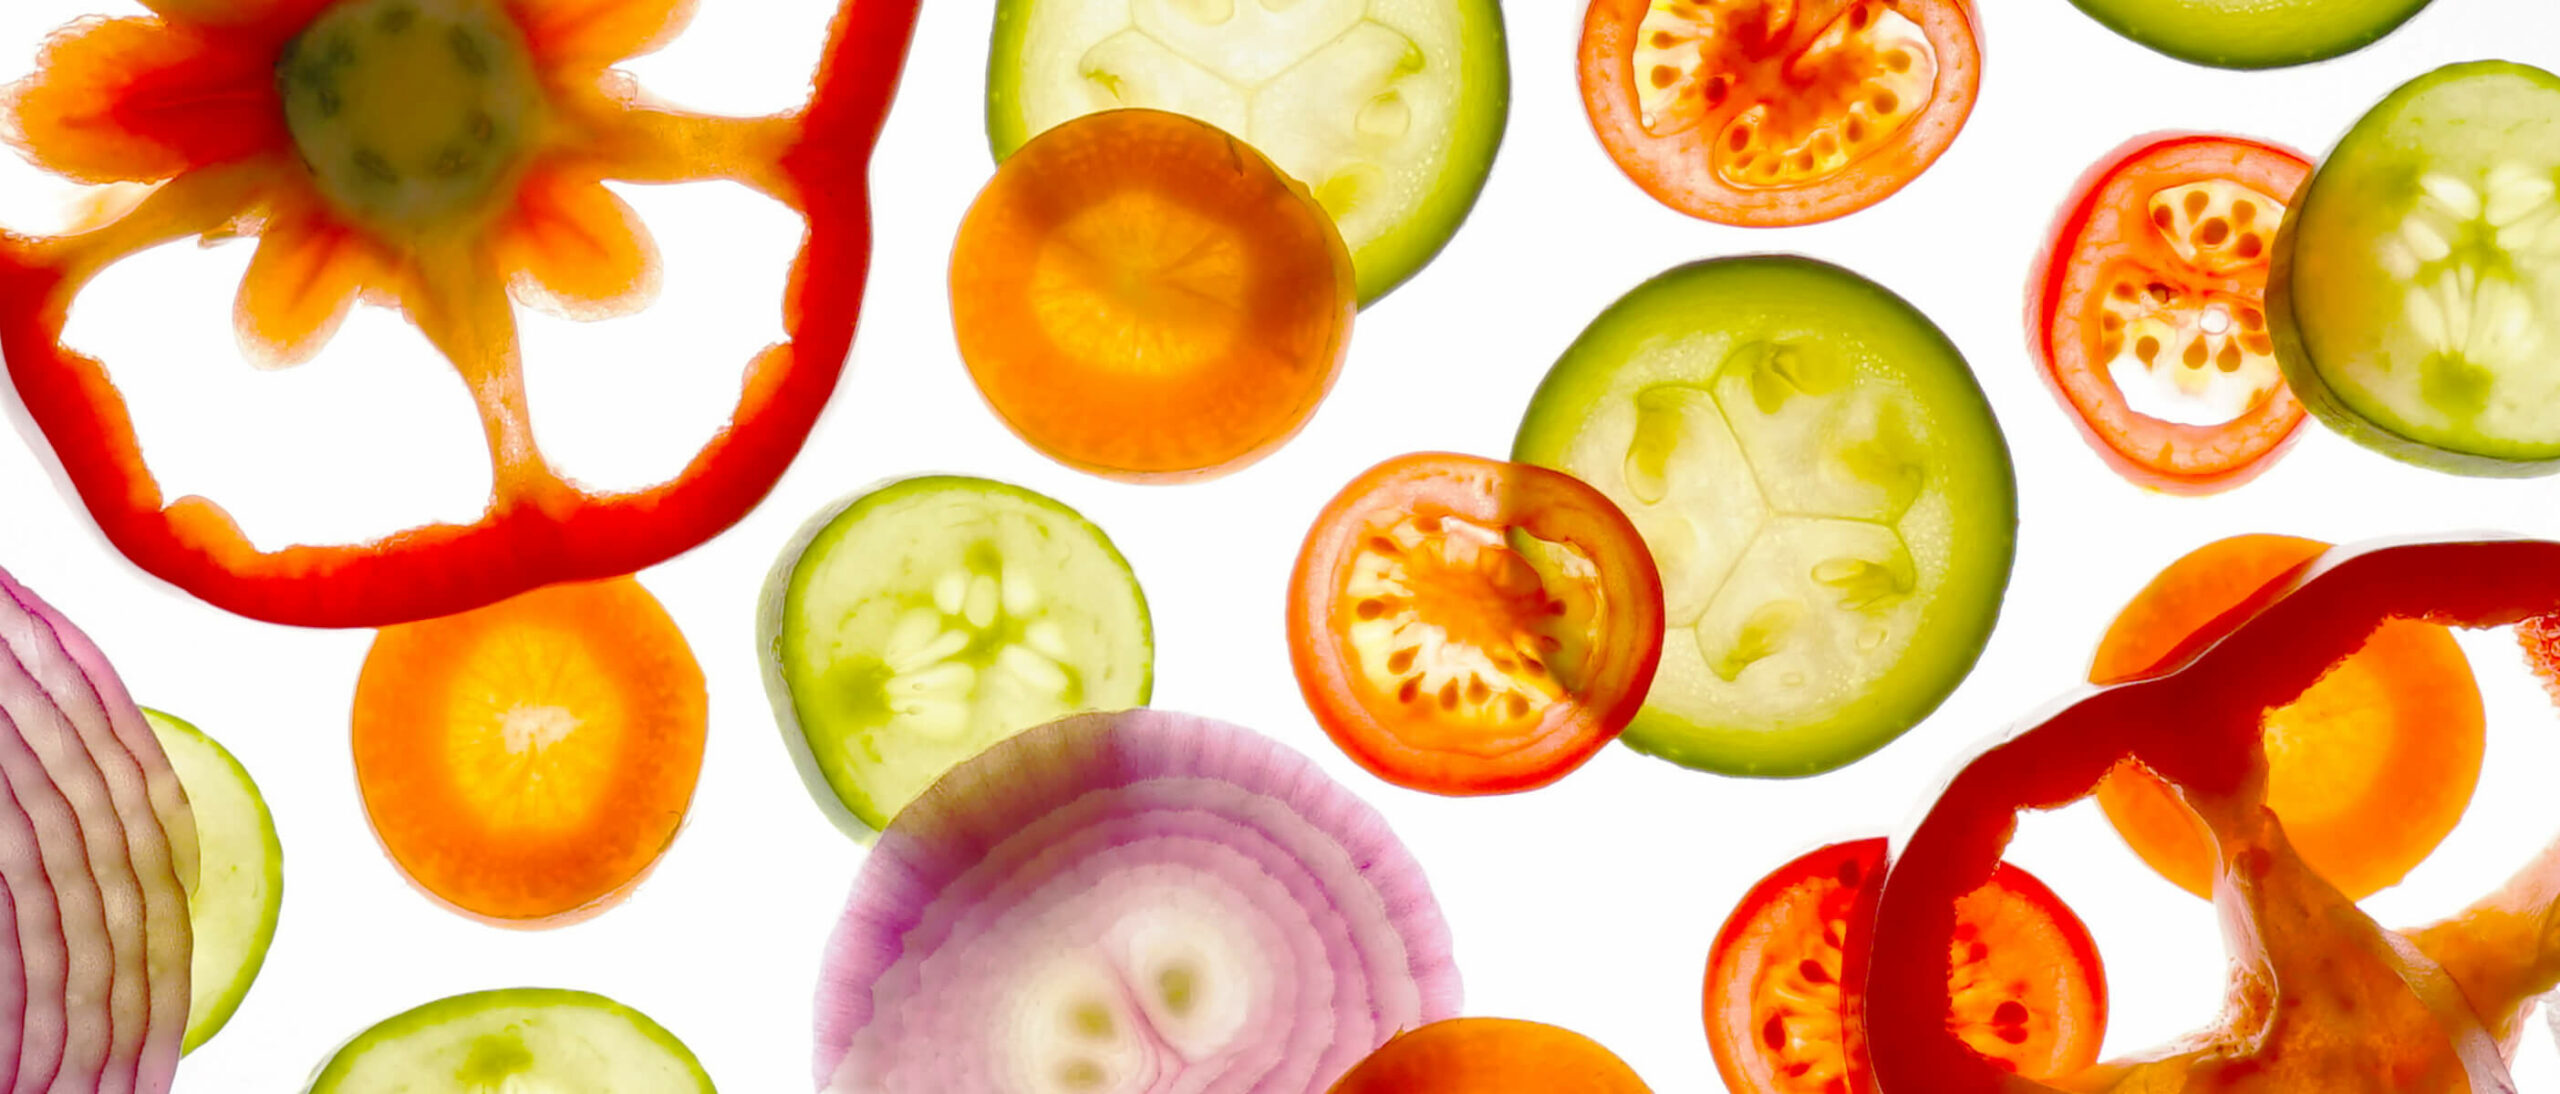 20 Creative Ways To Eat More Veggies Without Getting Bored